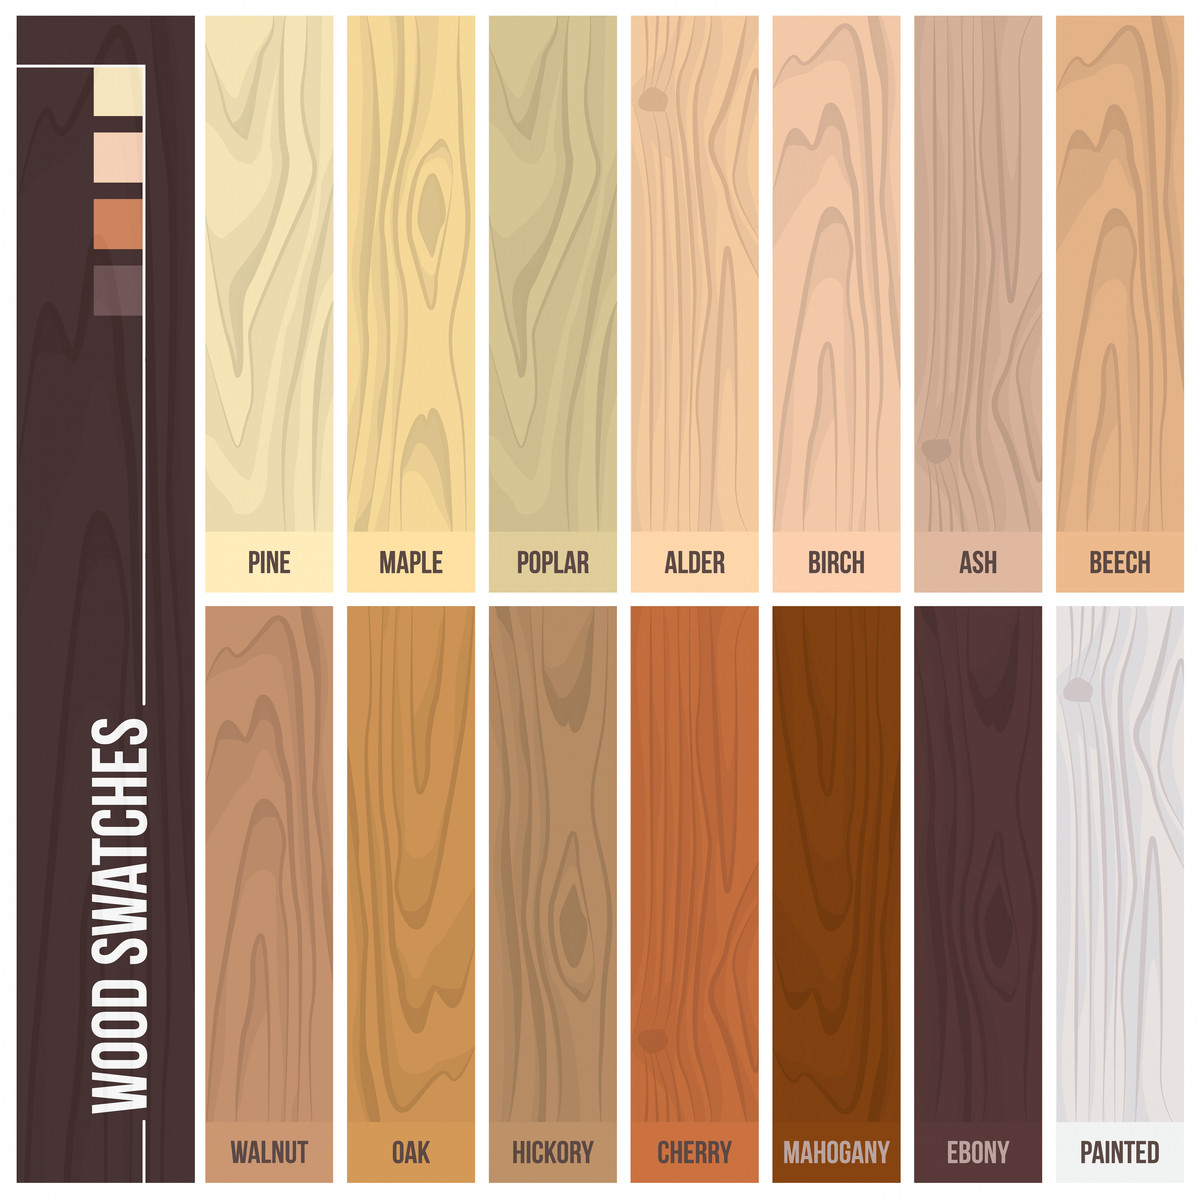 29 Fabulous Average Cost to Install Hardwood Flooring Per Square Foot 2024 free download average cost to install hardwood flooring per square foot of 12 types of hardwood flooring species styles edging dimensions for types of hardwood flooring illustrated guide